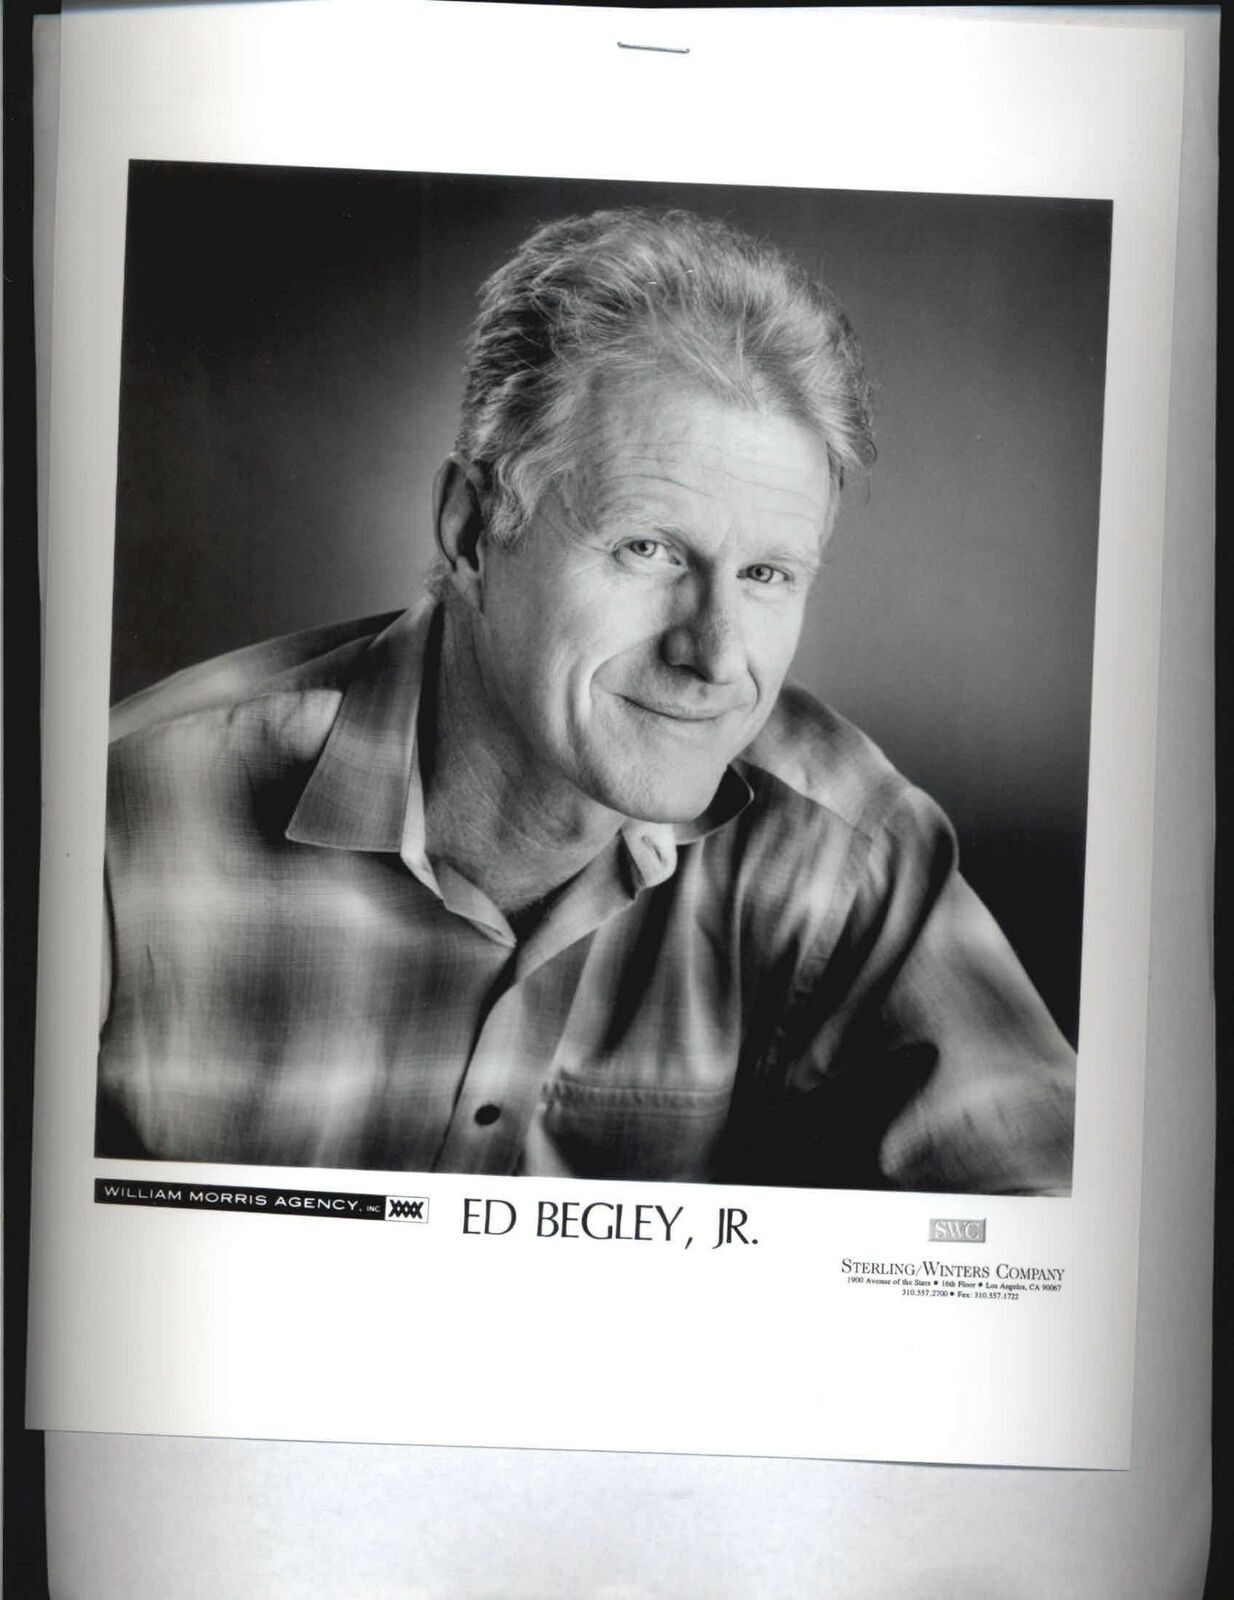 Ed Begley Jr. - 8x10 Headshot Photo Poster painting with Resume - Pineapple Express